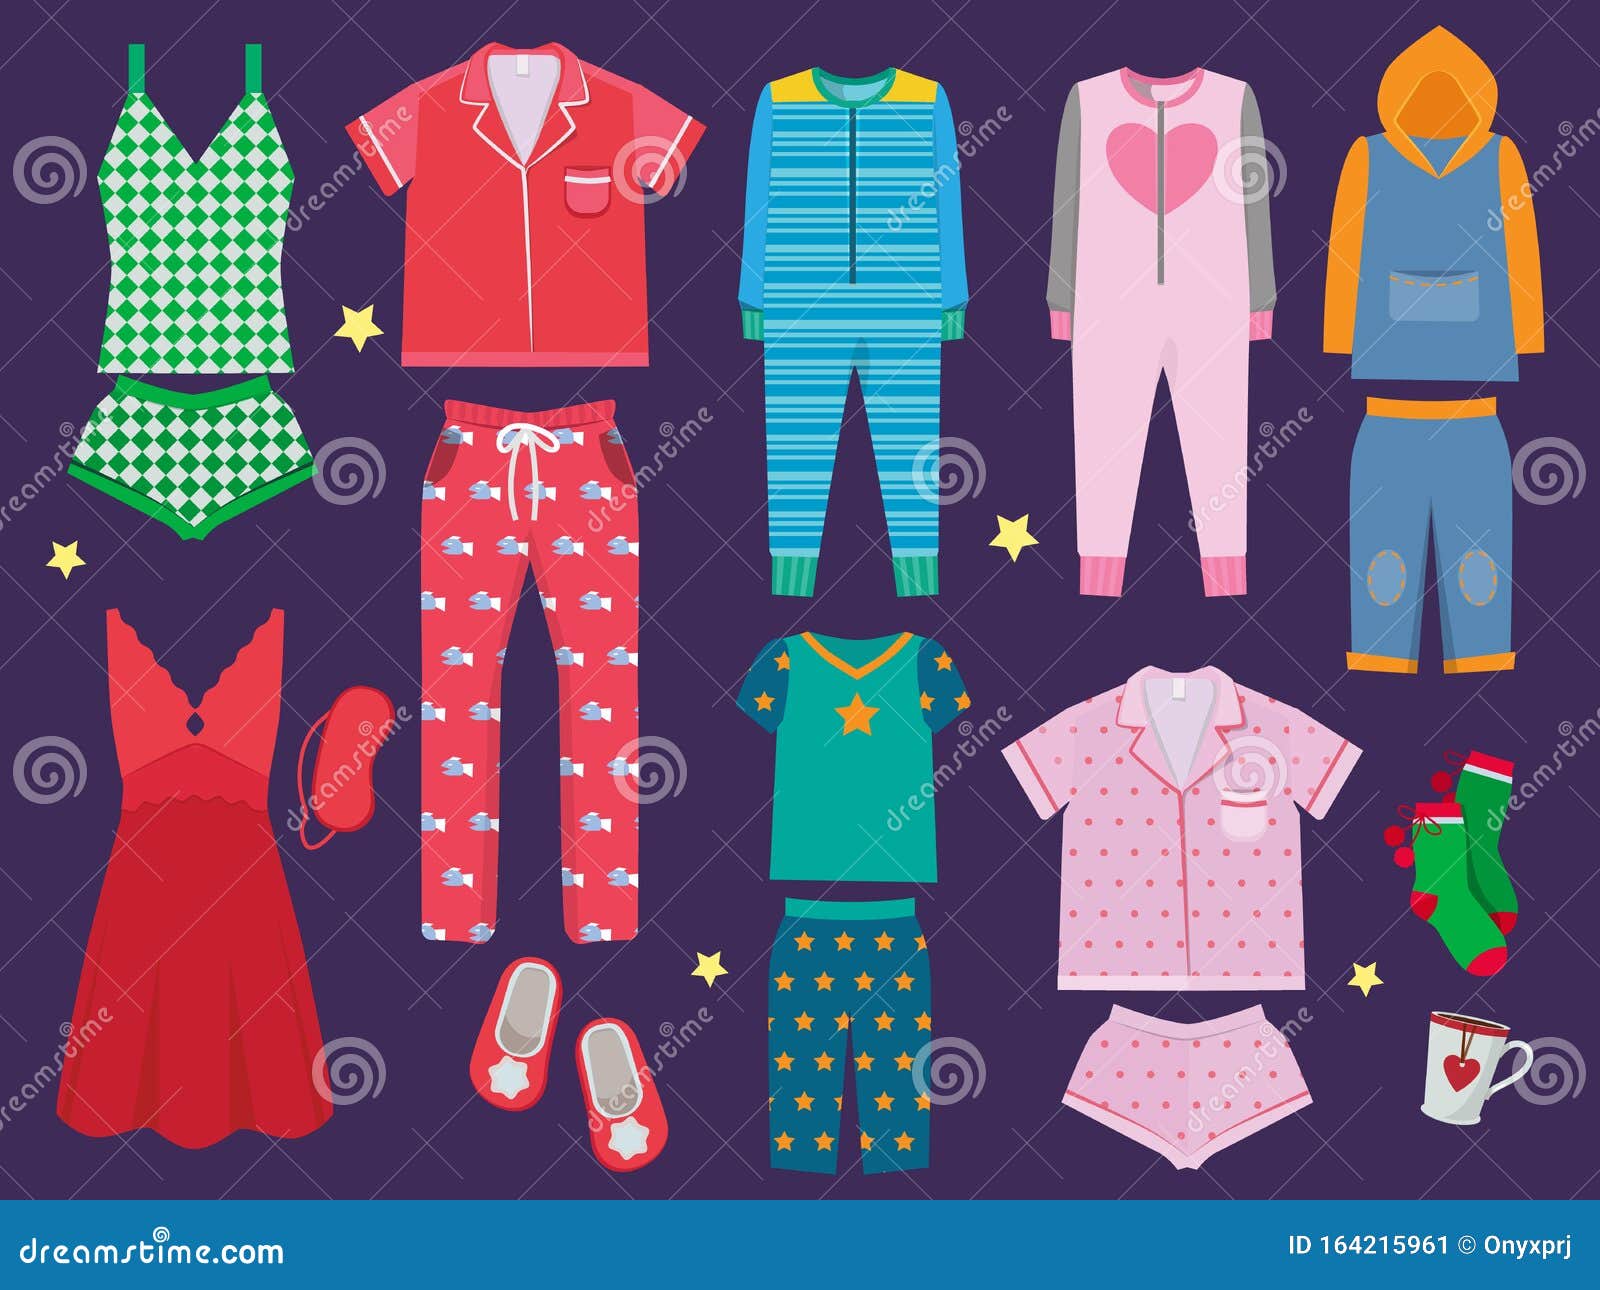 Pajamas Set. Sleeping Clothes Collection for Children and Adults ...